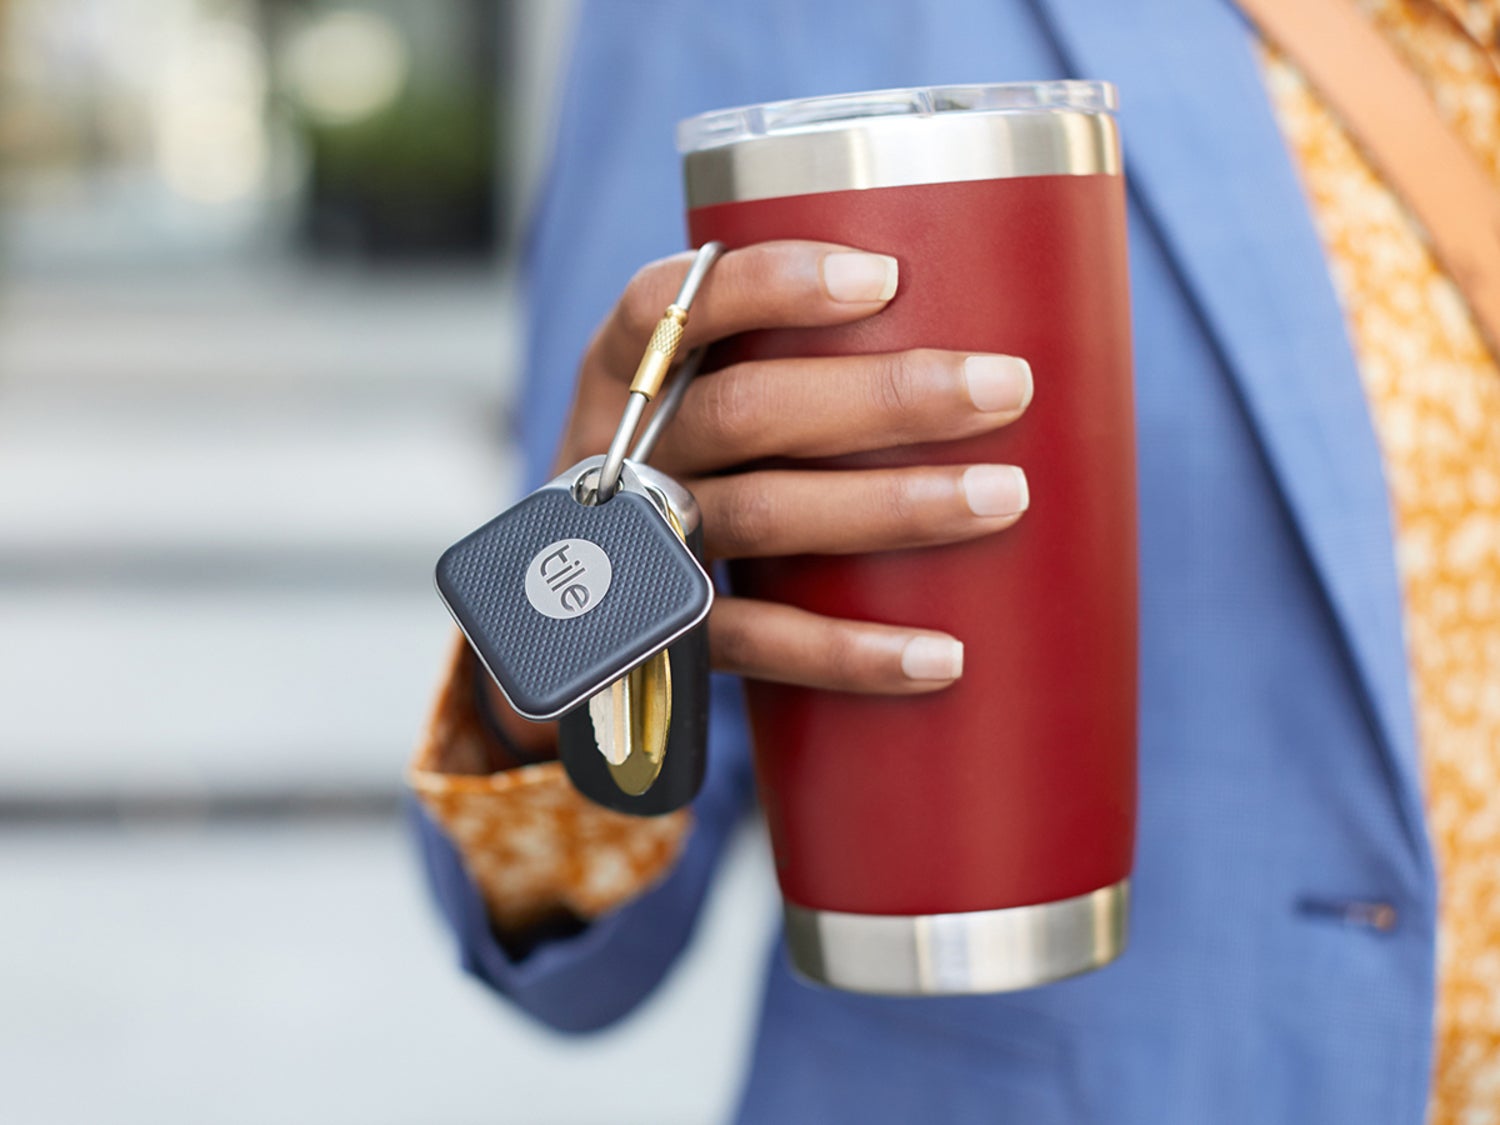 A person holding an insulated mug with a Tile tracker attached to their keys.